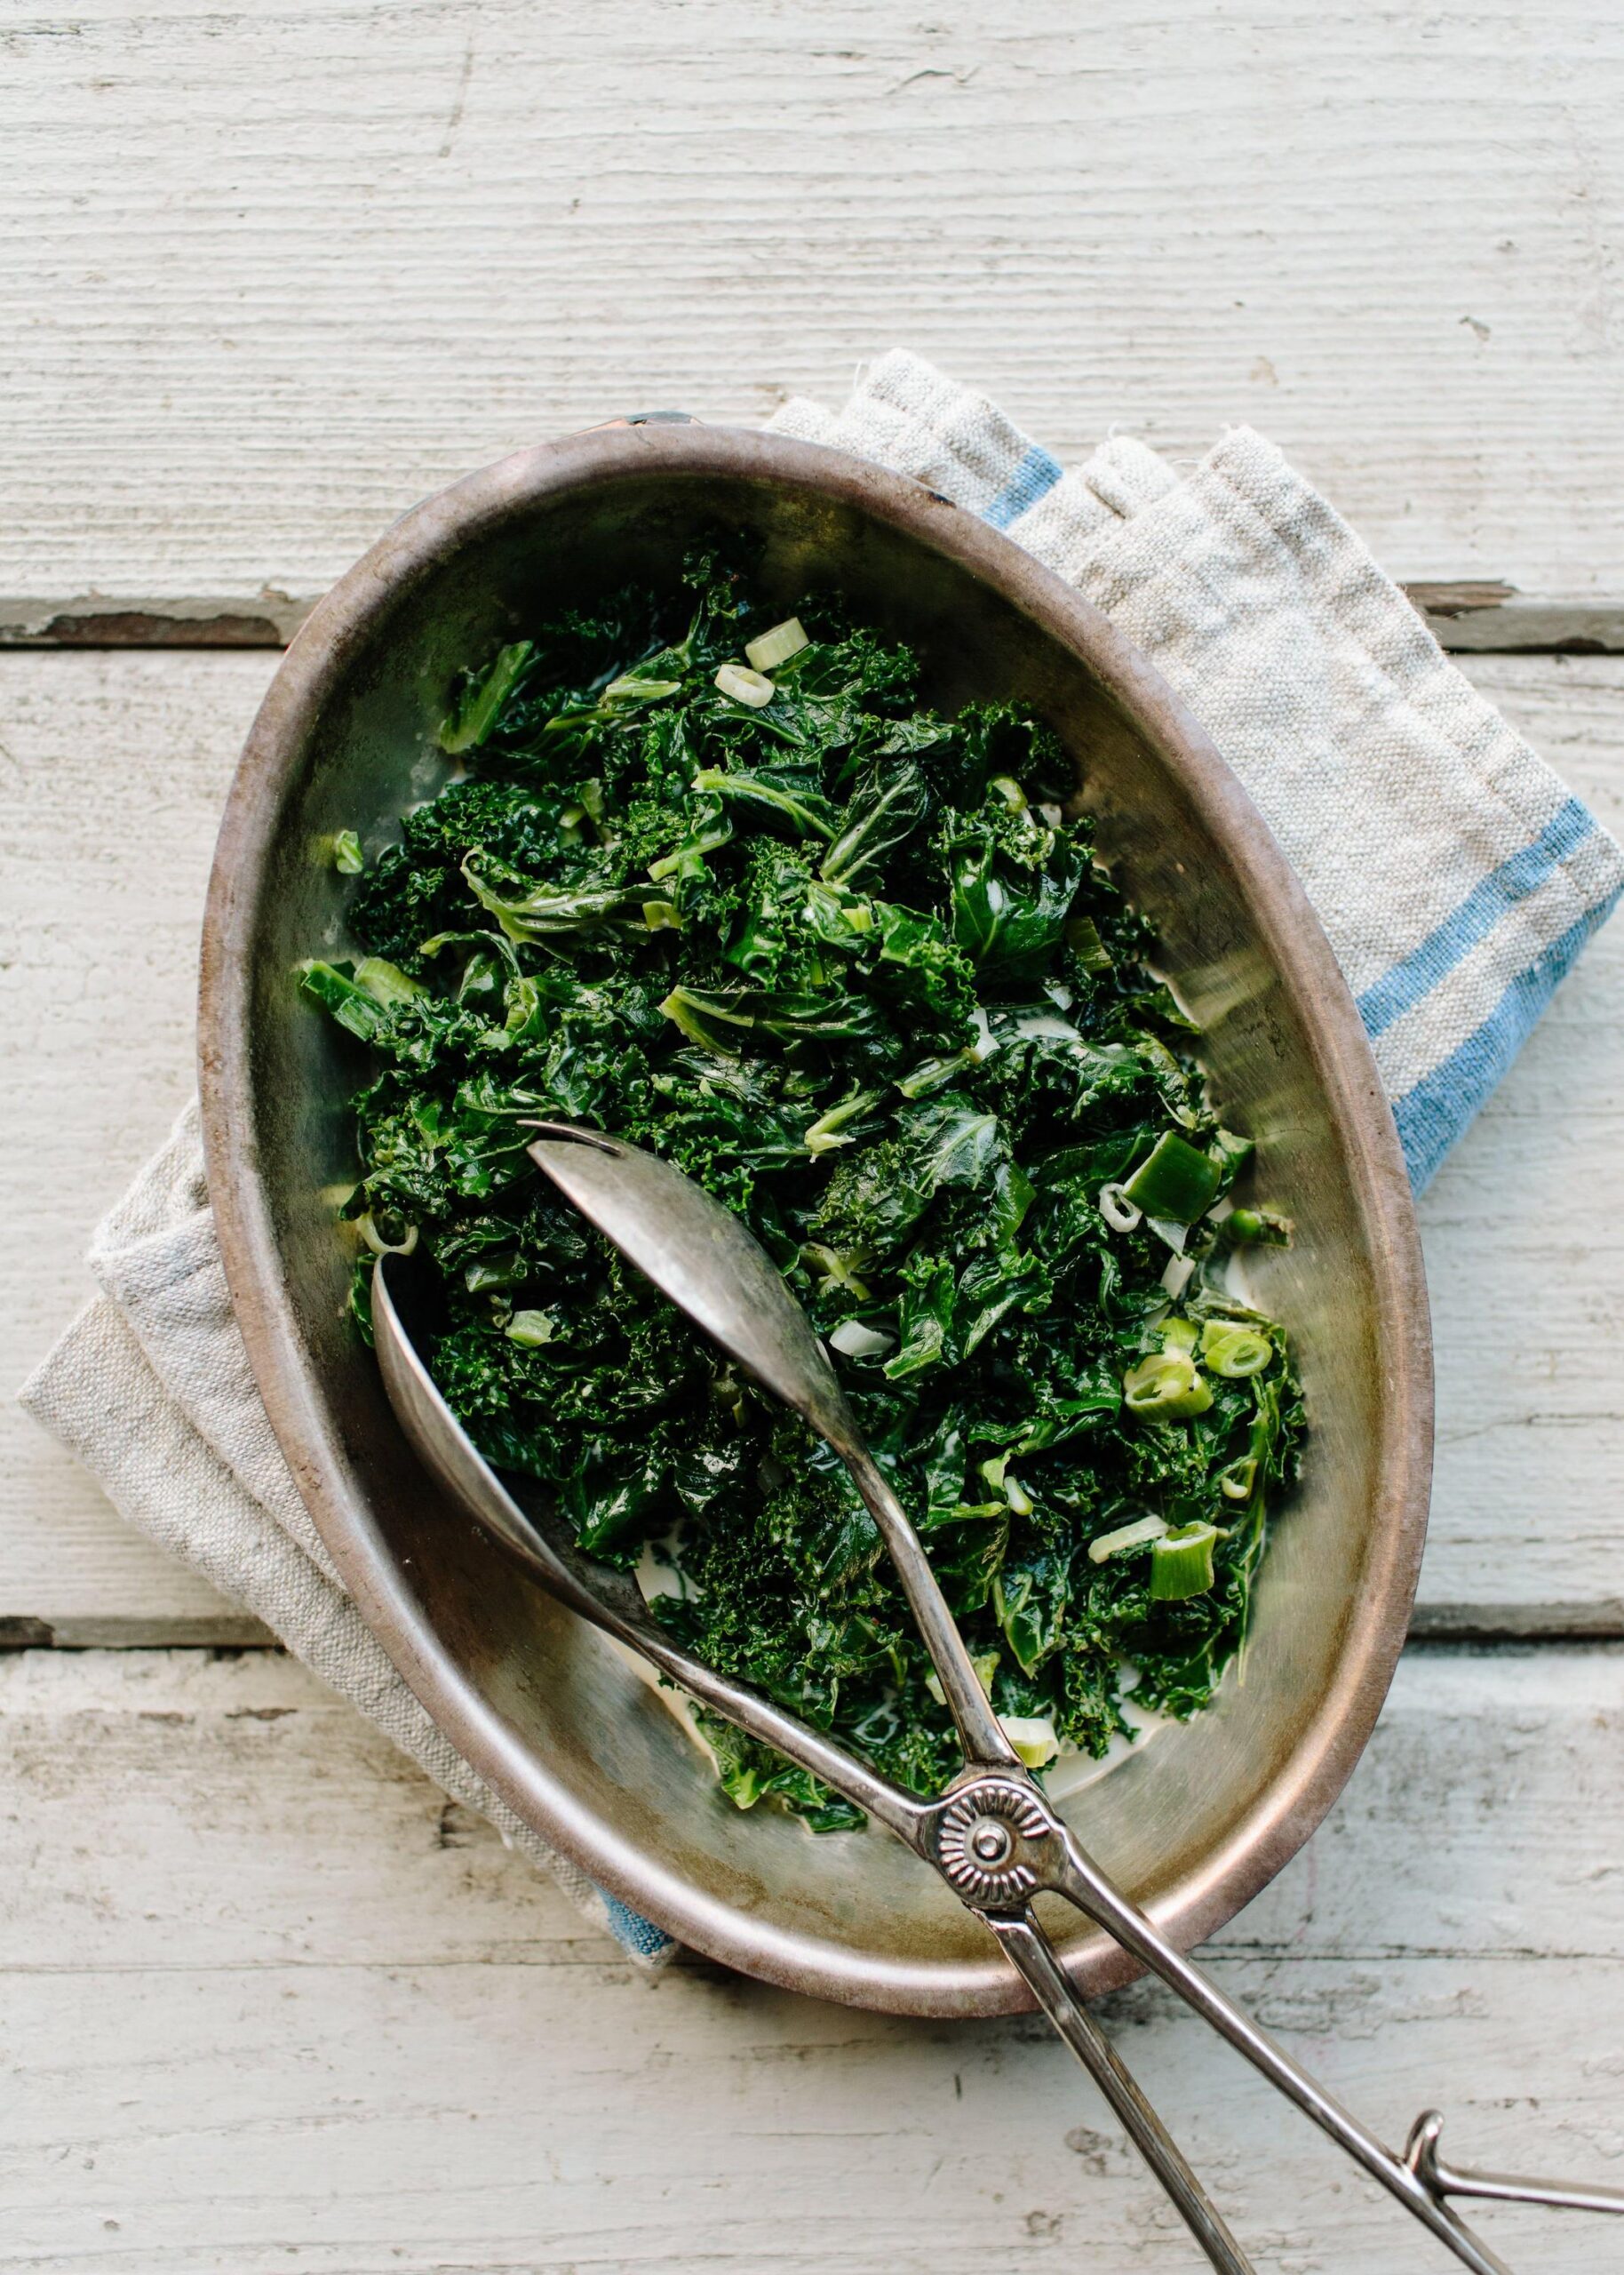 Healthy and Flavorful: Irish Kale With Cream Recipe